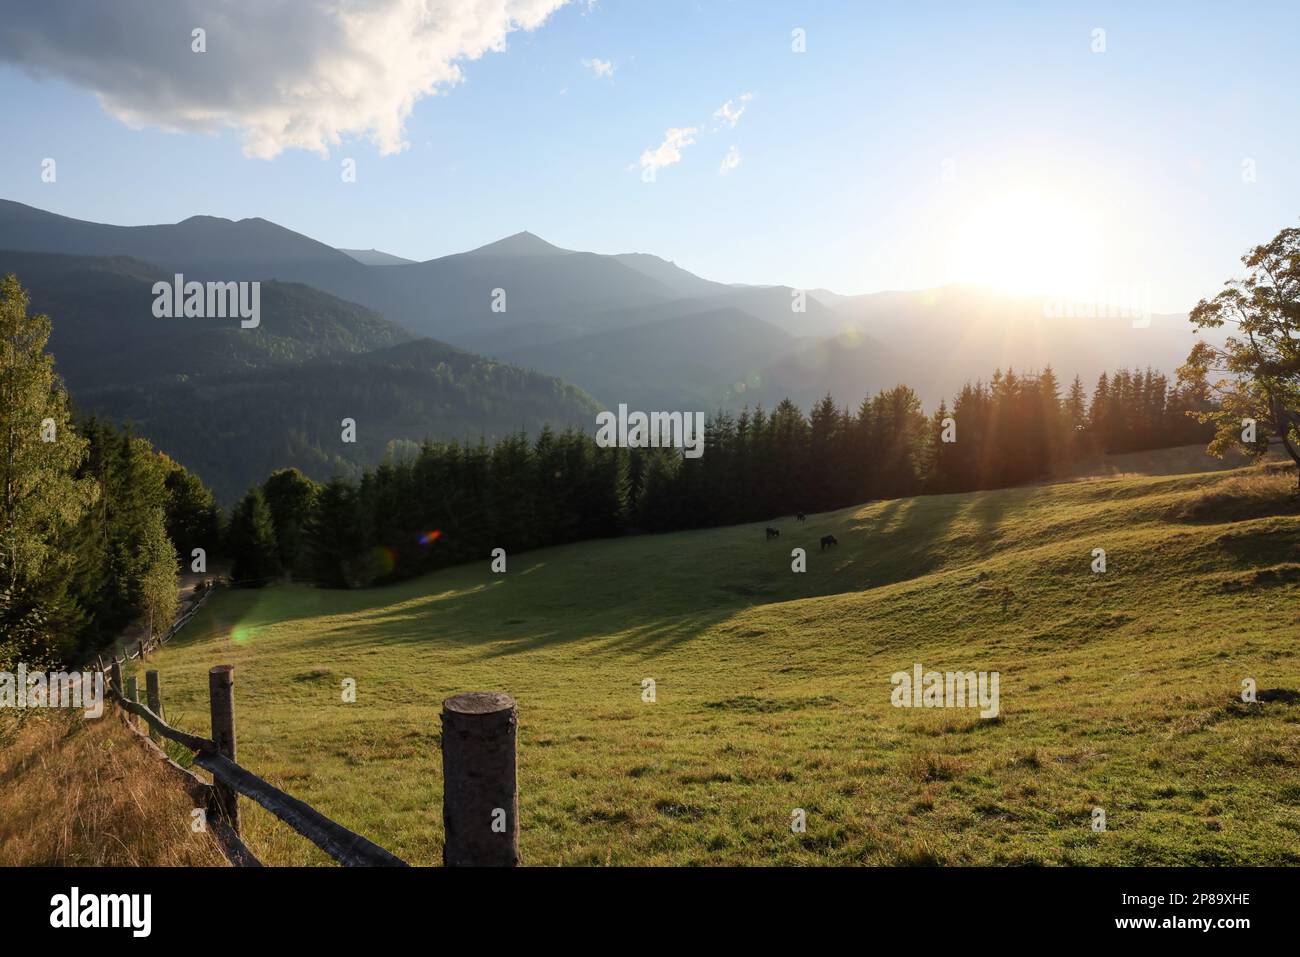 Morning sun shining over pasture in mountains Stock Photo